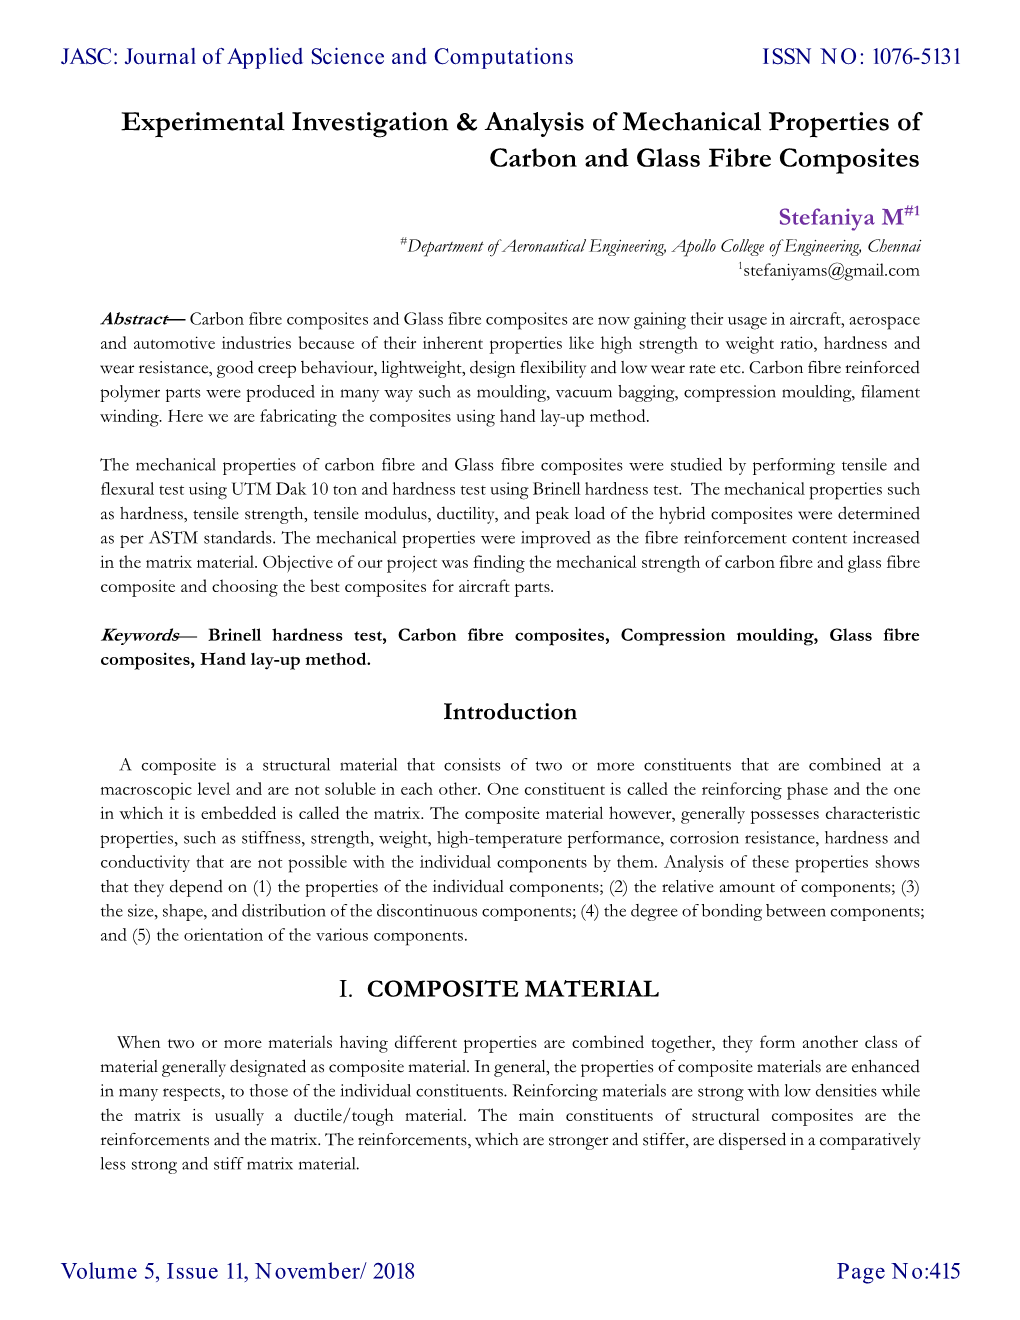 Experimental Investigation & Analysis of Mechanical Properties of Carbon